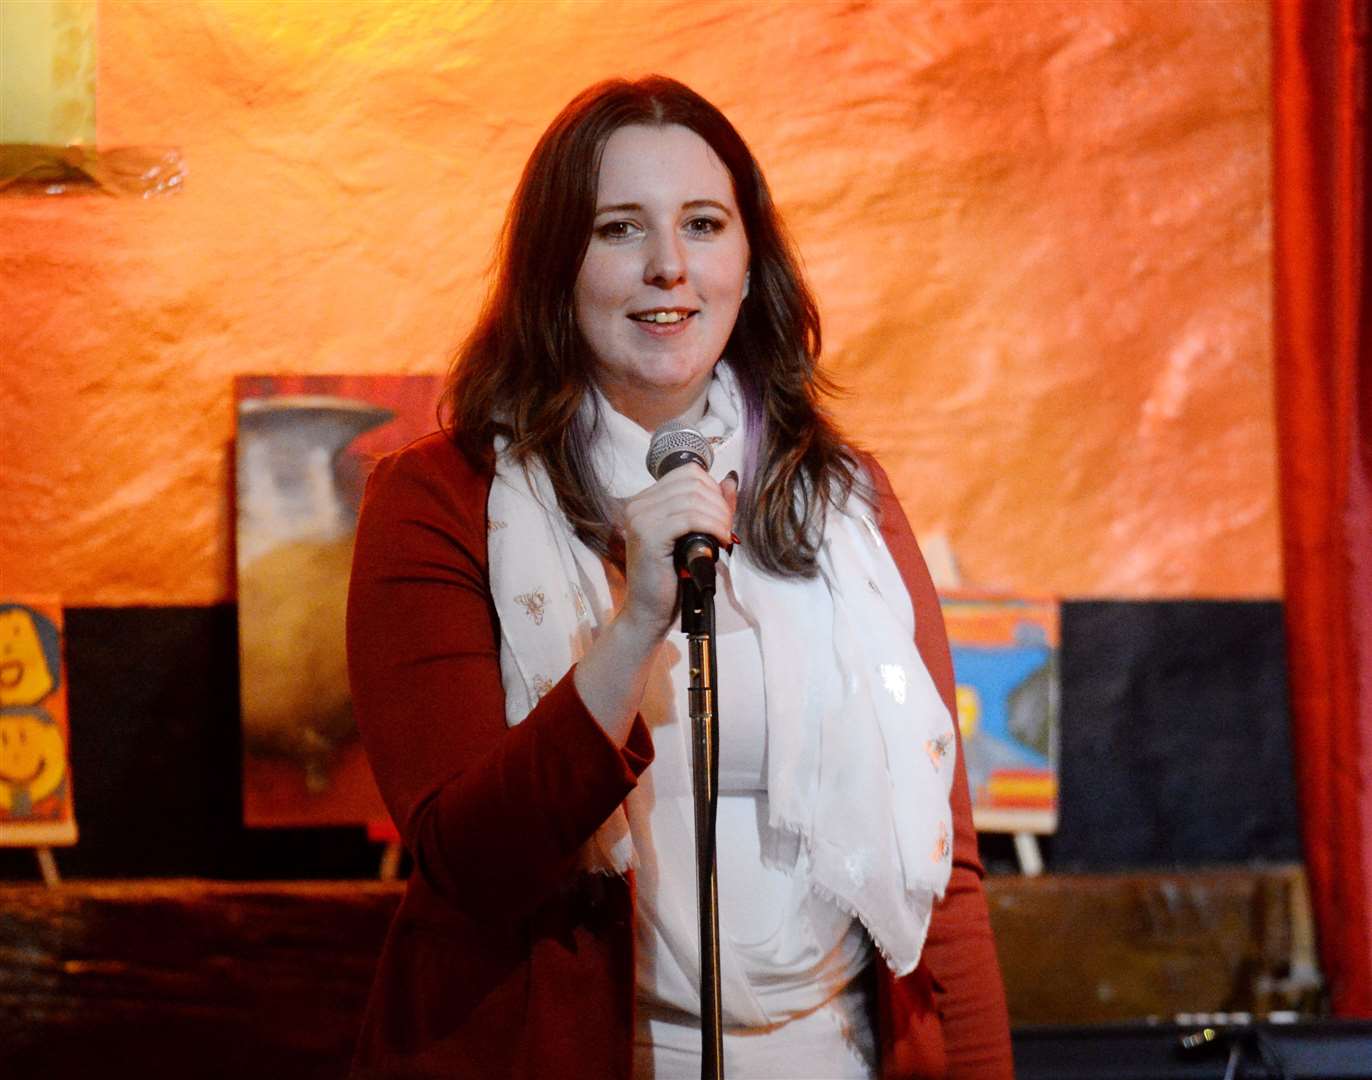 Inverness Central councillor Emma Roddick is also a poet who performed at the event.